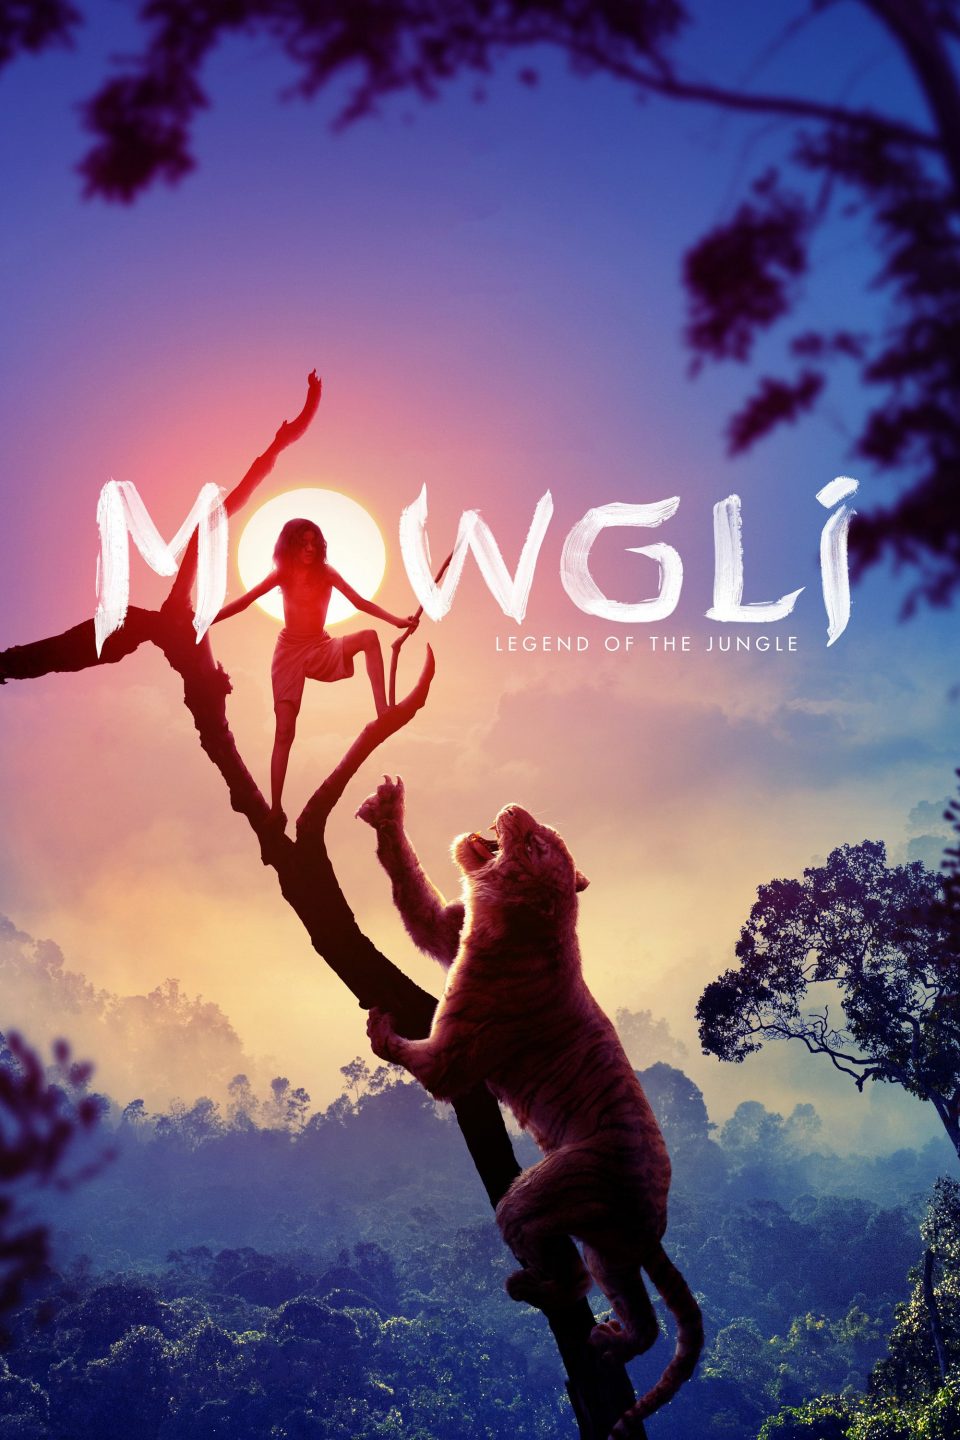 Poster for the movie "Mowgli: Legend of the Jungle"